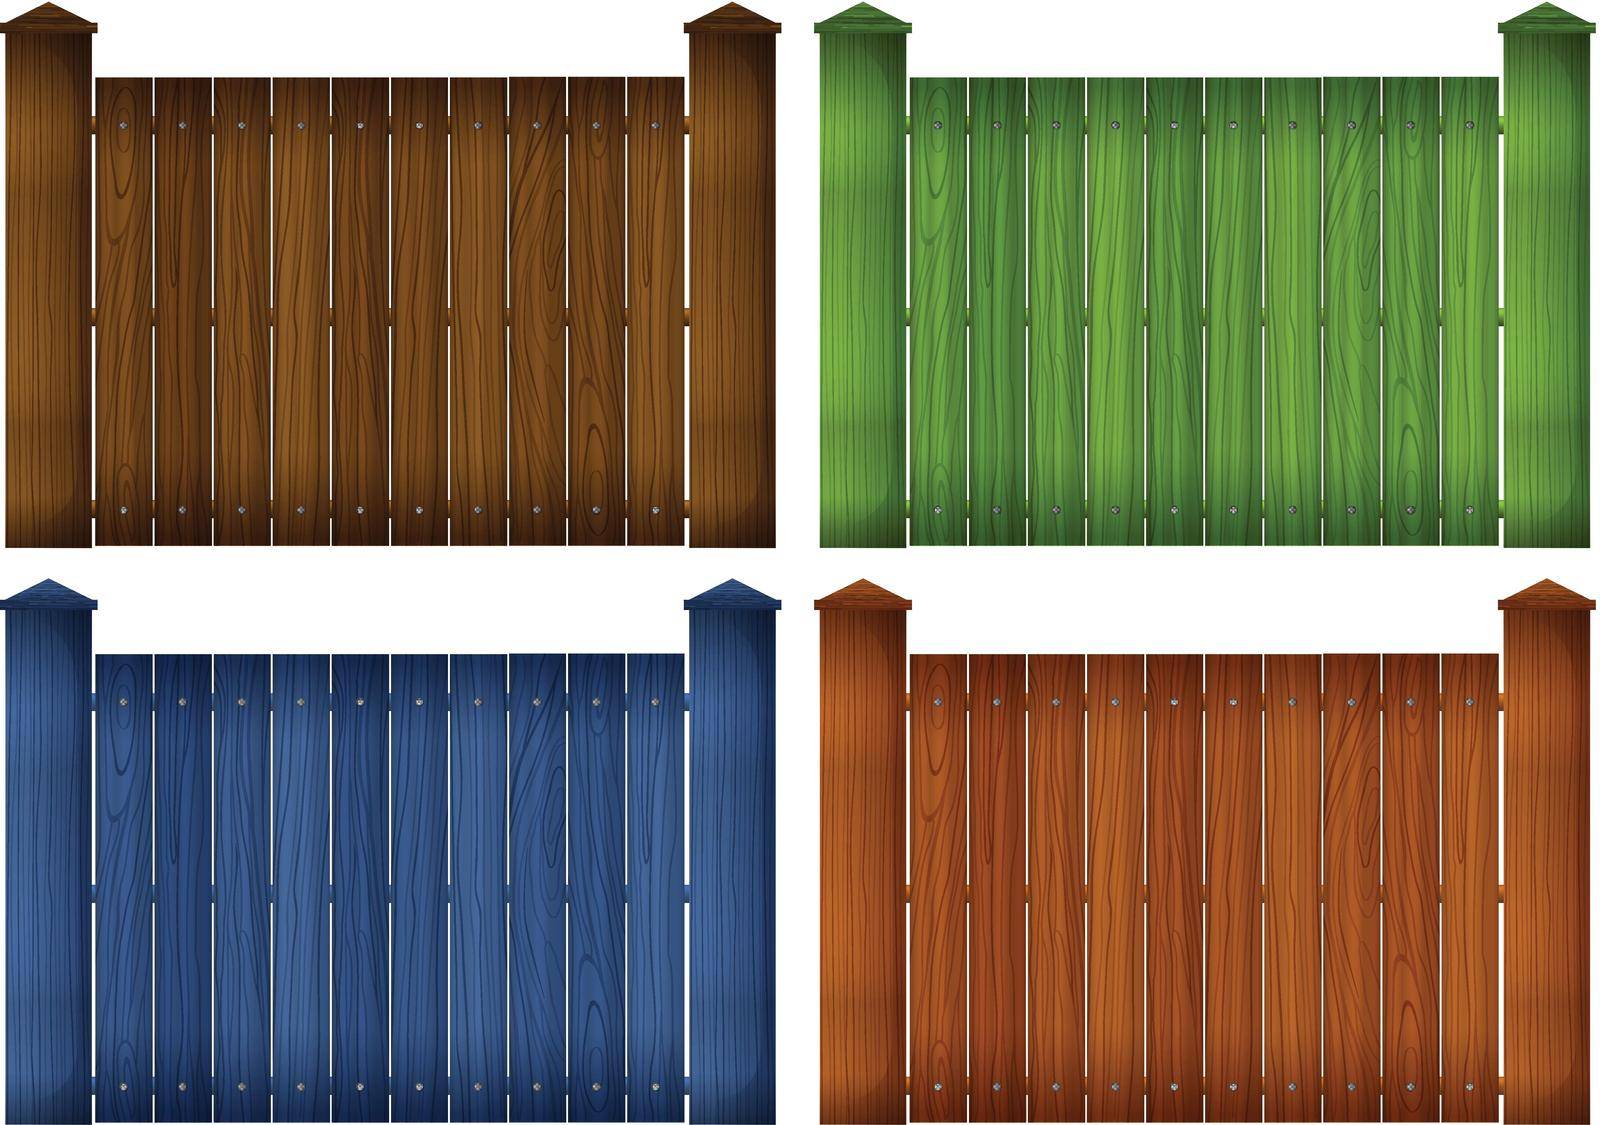 Illustration of the four colorful wooden fences on a white background